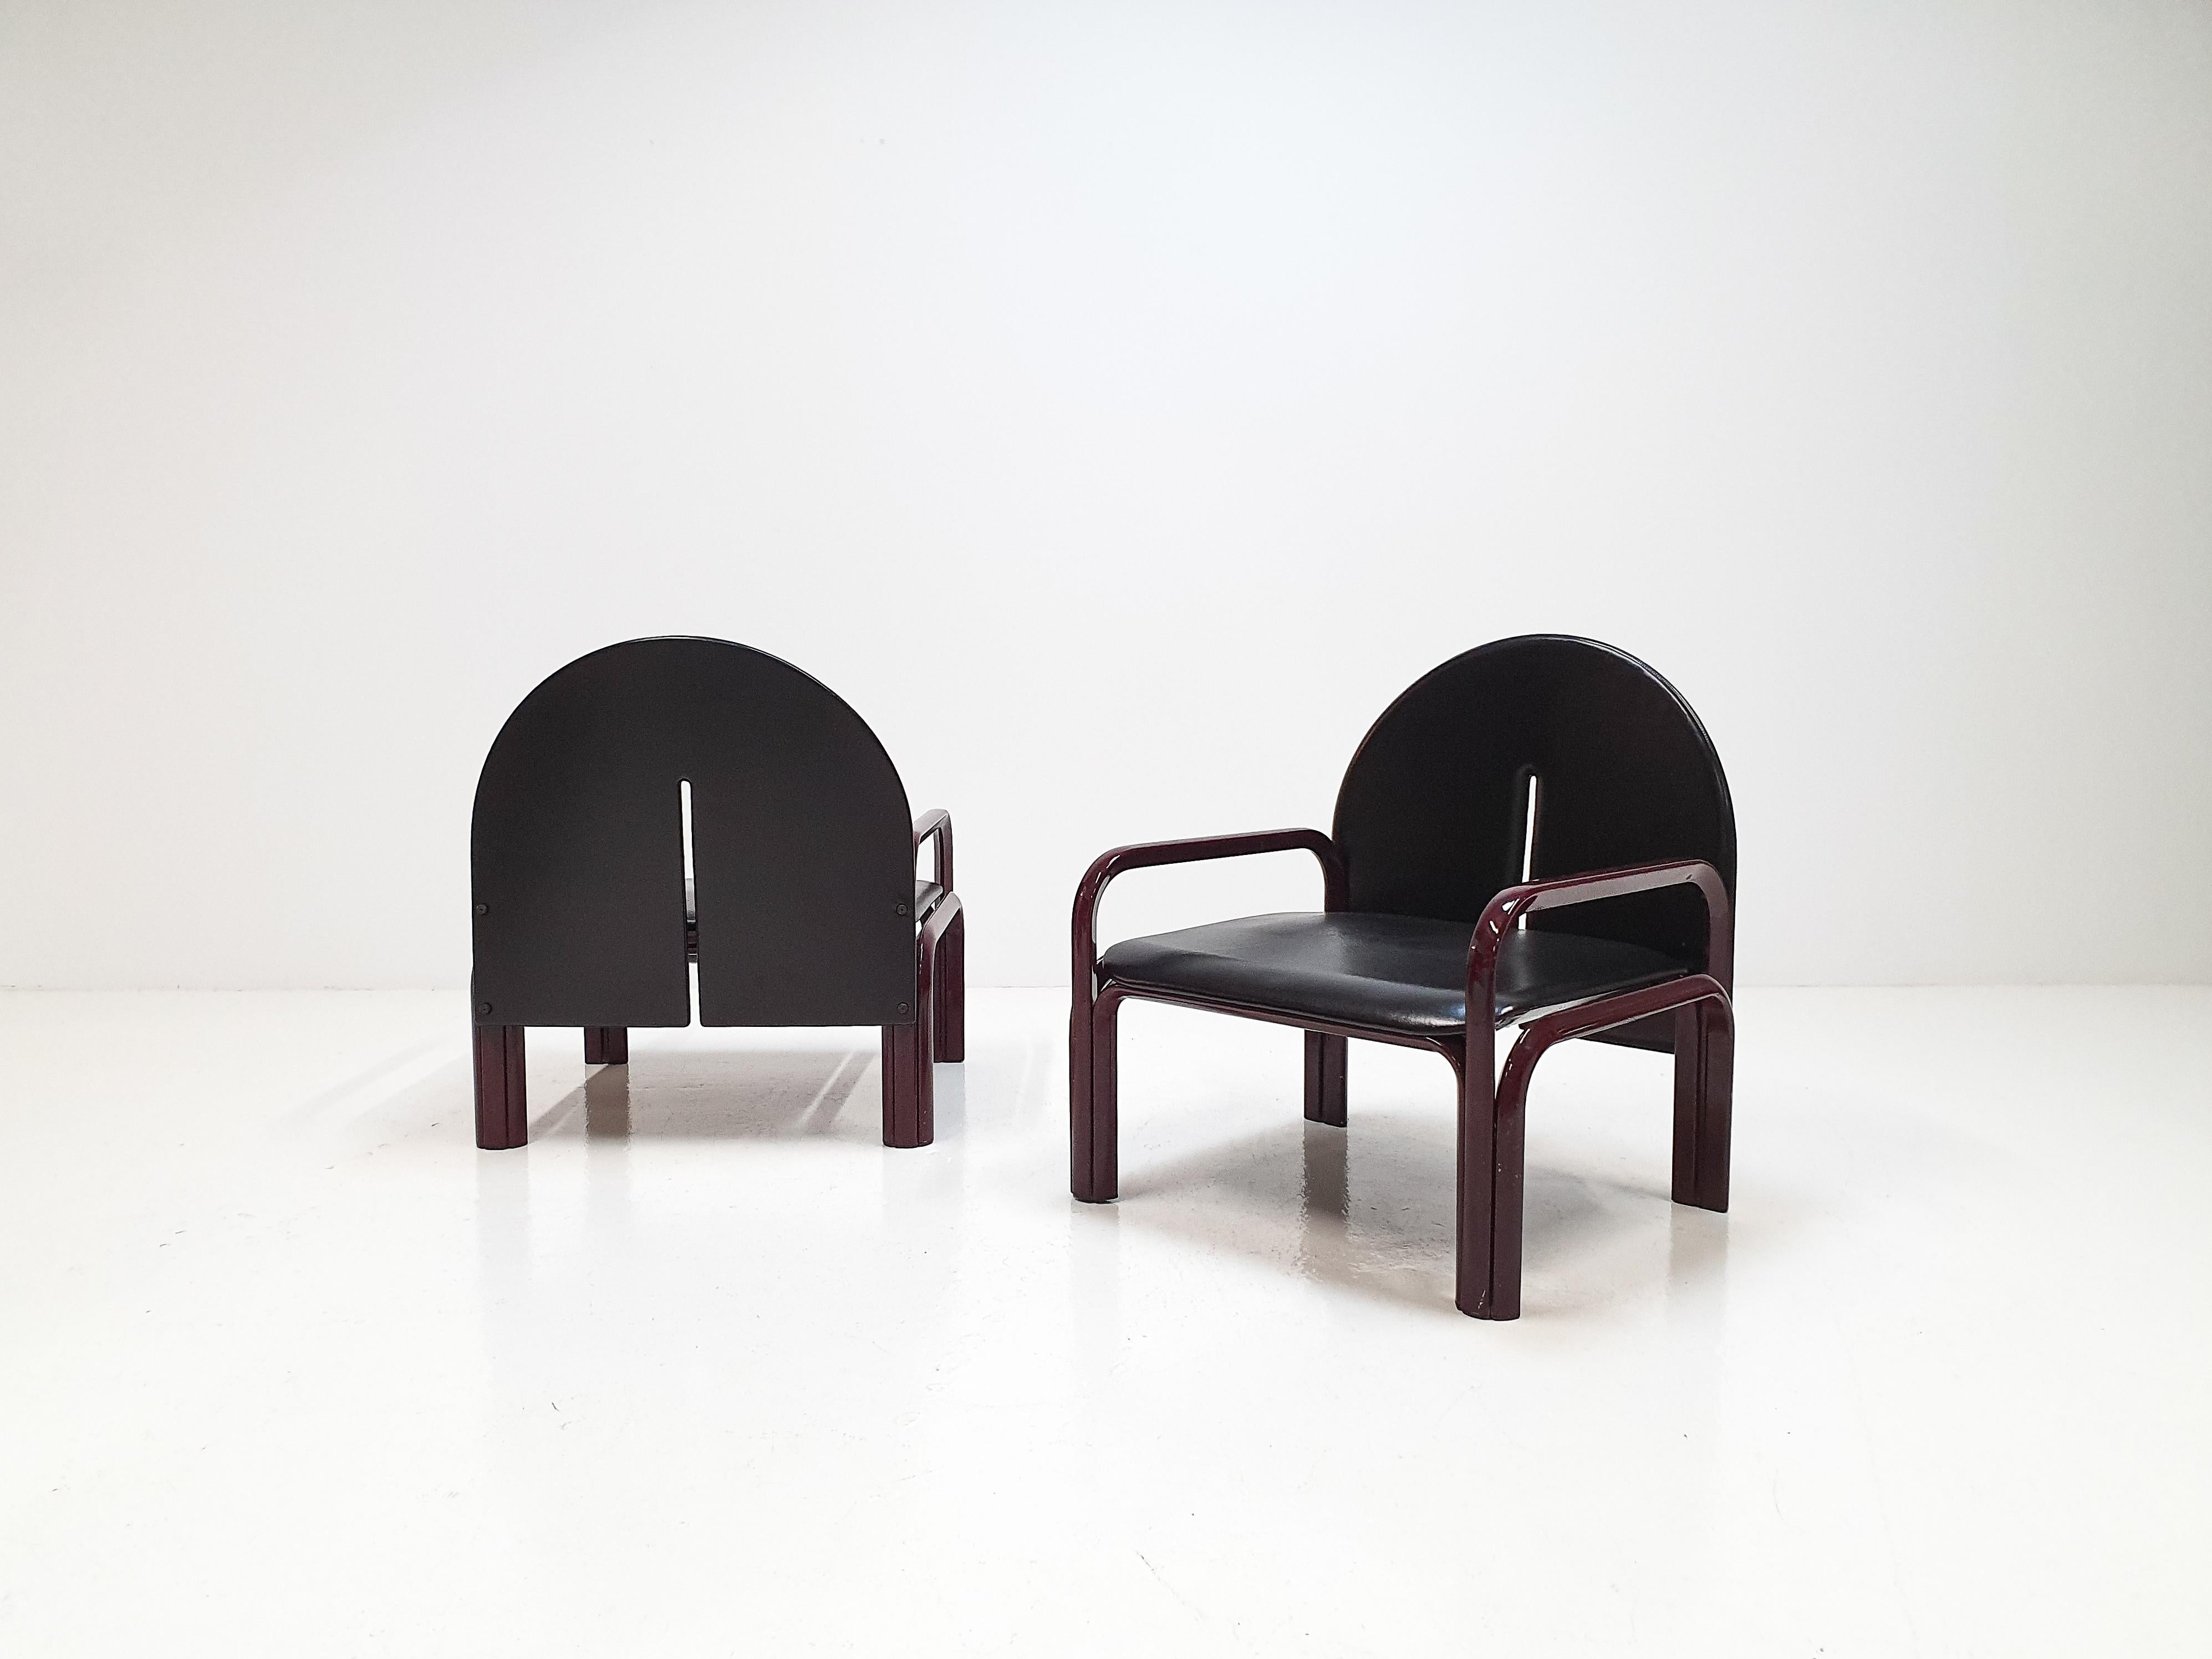 A pair of hard to source tubular steel Model '54 L' armchairs by Gae Aulenti.

Designed in 1976 and produced by Knoll International with Bordeaux red frames and black seat and backrest.

Dimensions:
Height 77 cm / 30.15 inches
Depth 69.5 cm / 27.36